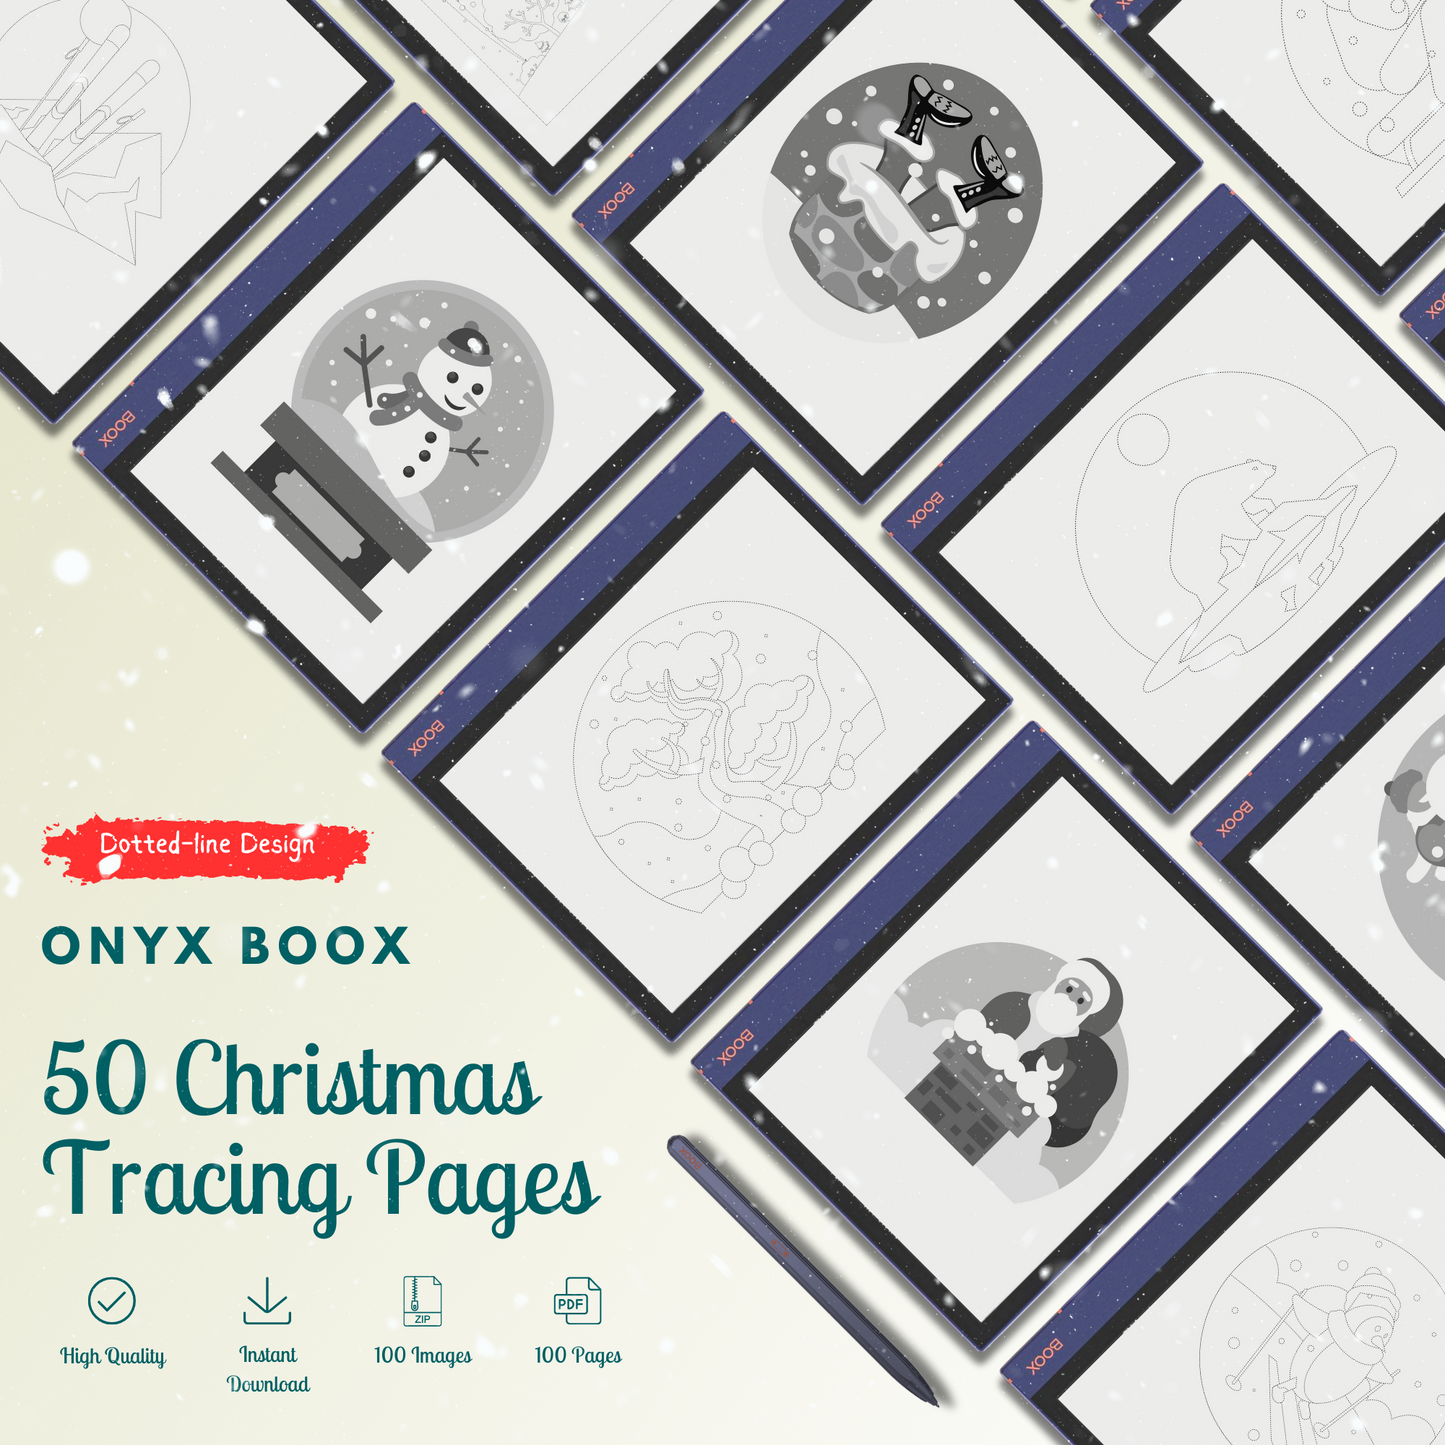 This is a Digital Download of 100 Winter-Centric Dotted-Line Tracing Pages meticulously designed for Onyx Boox. Compatible with Boox Note Air 1, Boox Note Air 2, Boox Note Air Plus, Boox Nova Air, Boox Nova Air C, Boox Tab Ultra and Boox Tab Ultra C.